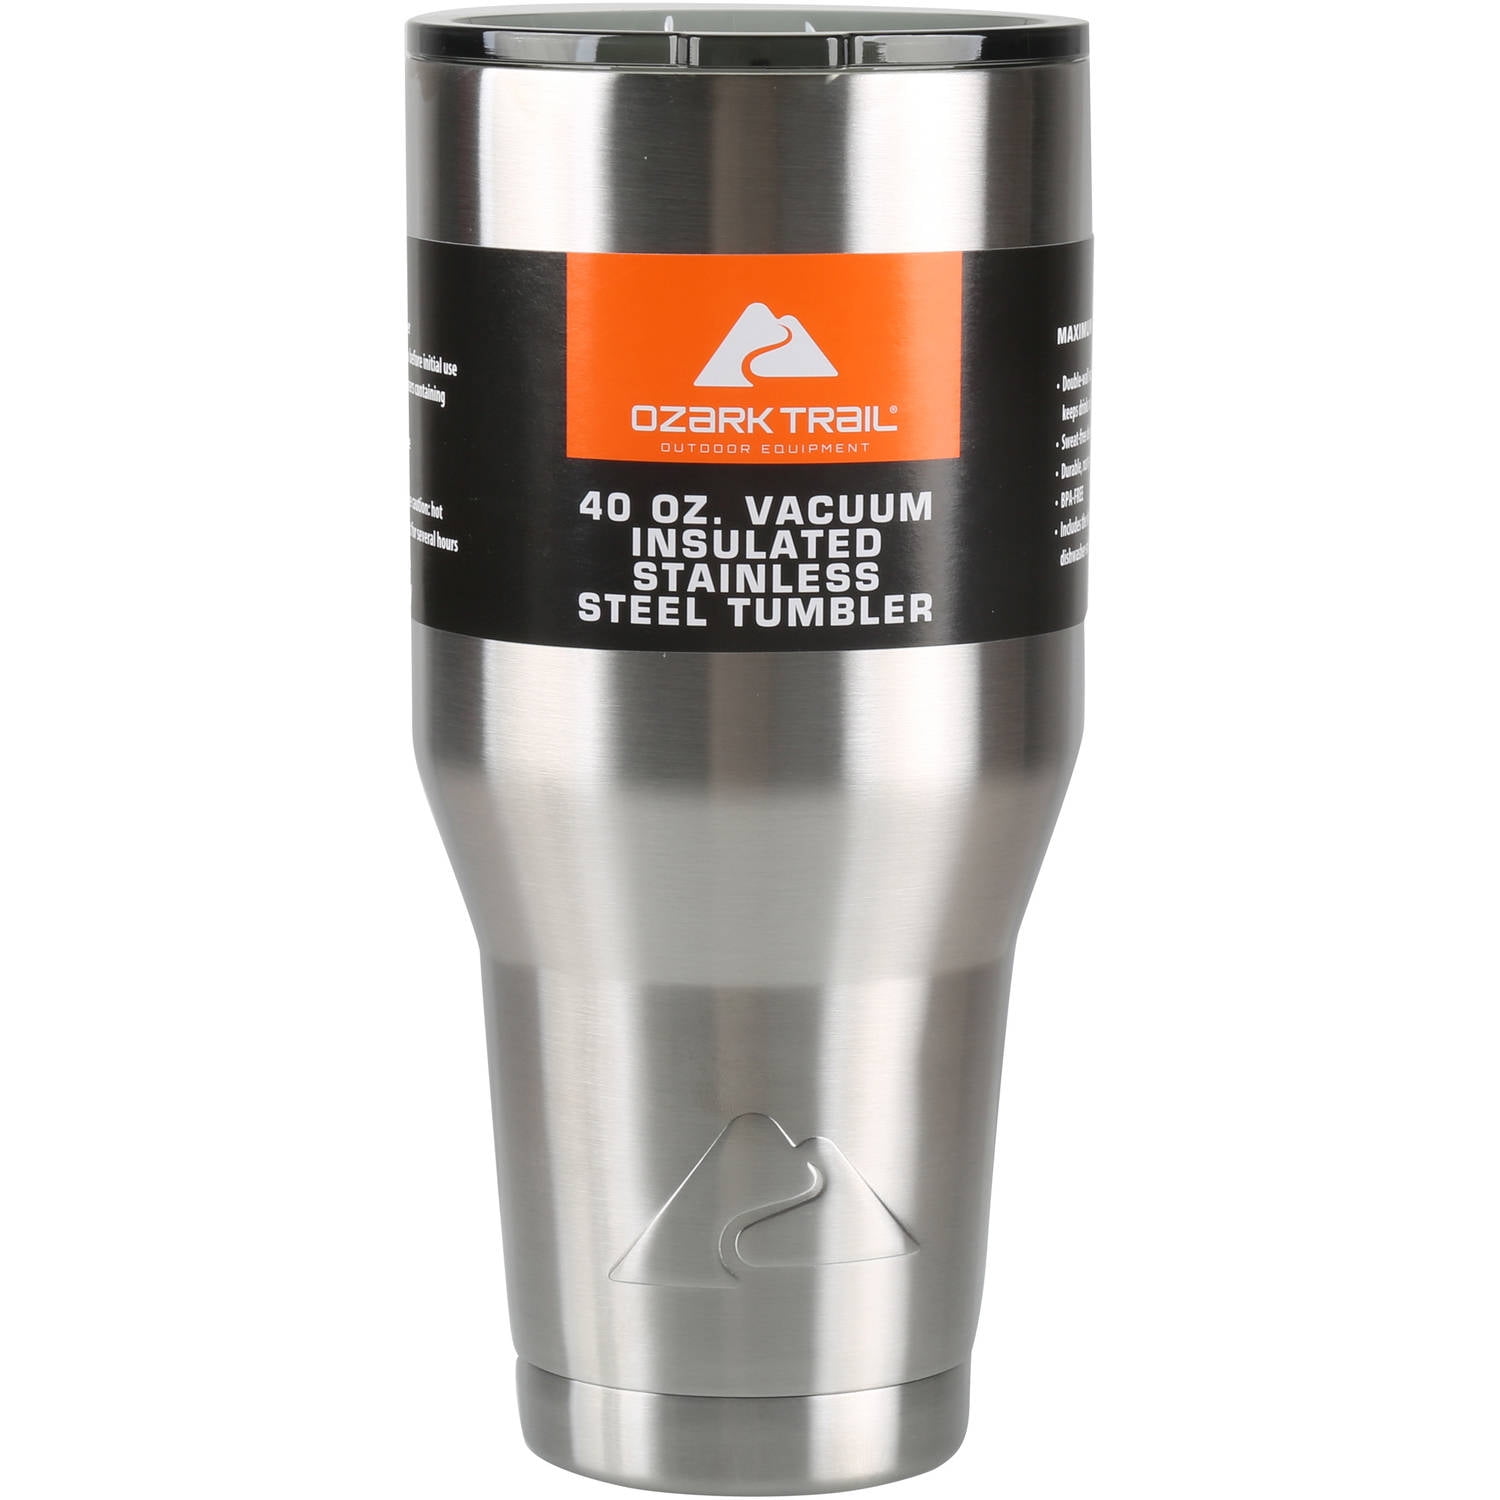 Ozark Trail Vacuum Insulated Stainless Steel 40-Oz Tumbler $14.97 (Reg.  $19.97) - 4 Colors - Fabulessly Frugal